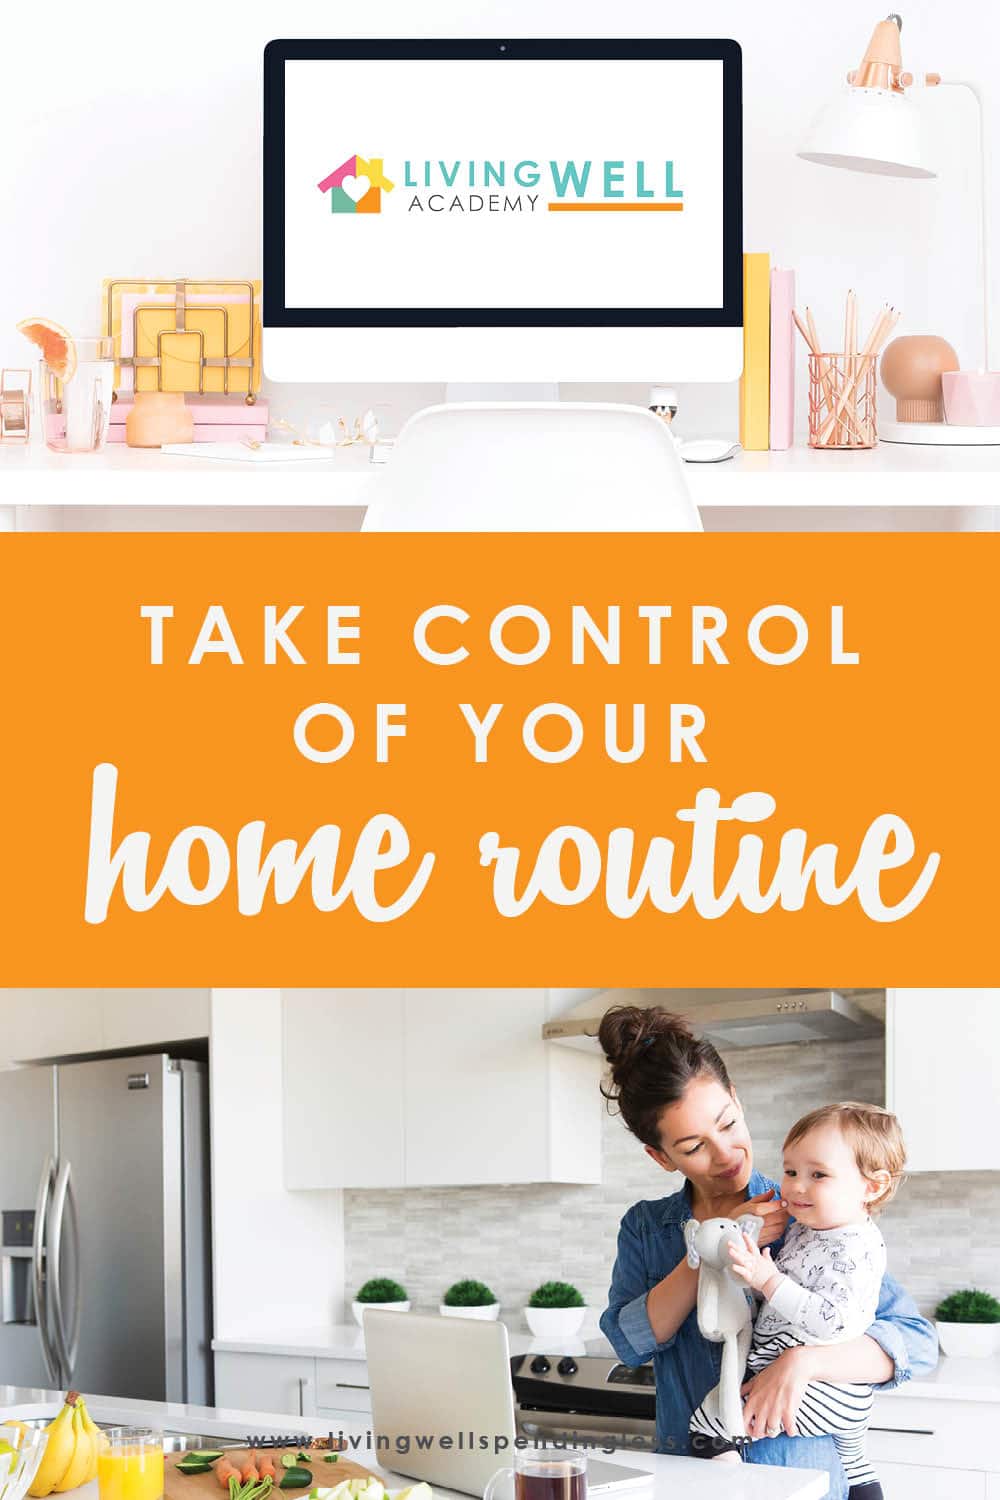 Want to Take Control of Your Home Routine? Don't Miss This! | Living Well Academy The world is a little crazy right now, and with all the stress and uncertainty going around, something to focus on to help you in all areas of life might be exactly what you need. Living Well Academy is a life management course created explicitly to help you feel productive and confident in four key areas: habits and routine, simplifying mealtime, keeping tidy, and mastering money. After this course, you will feel ready to tackle whatever craziness comes your way! Don't miss this first launch that we'll be hosting live! #lifegoals #mastermoney #smartmoney #foodmadesimple